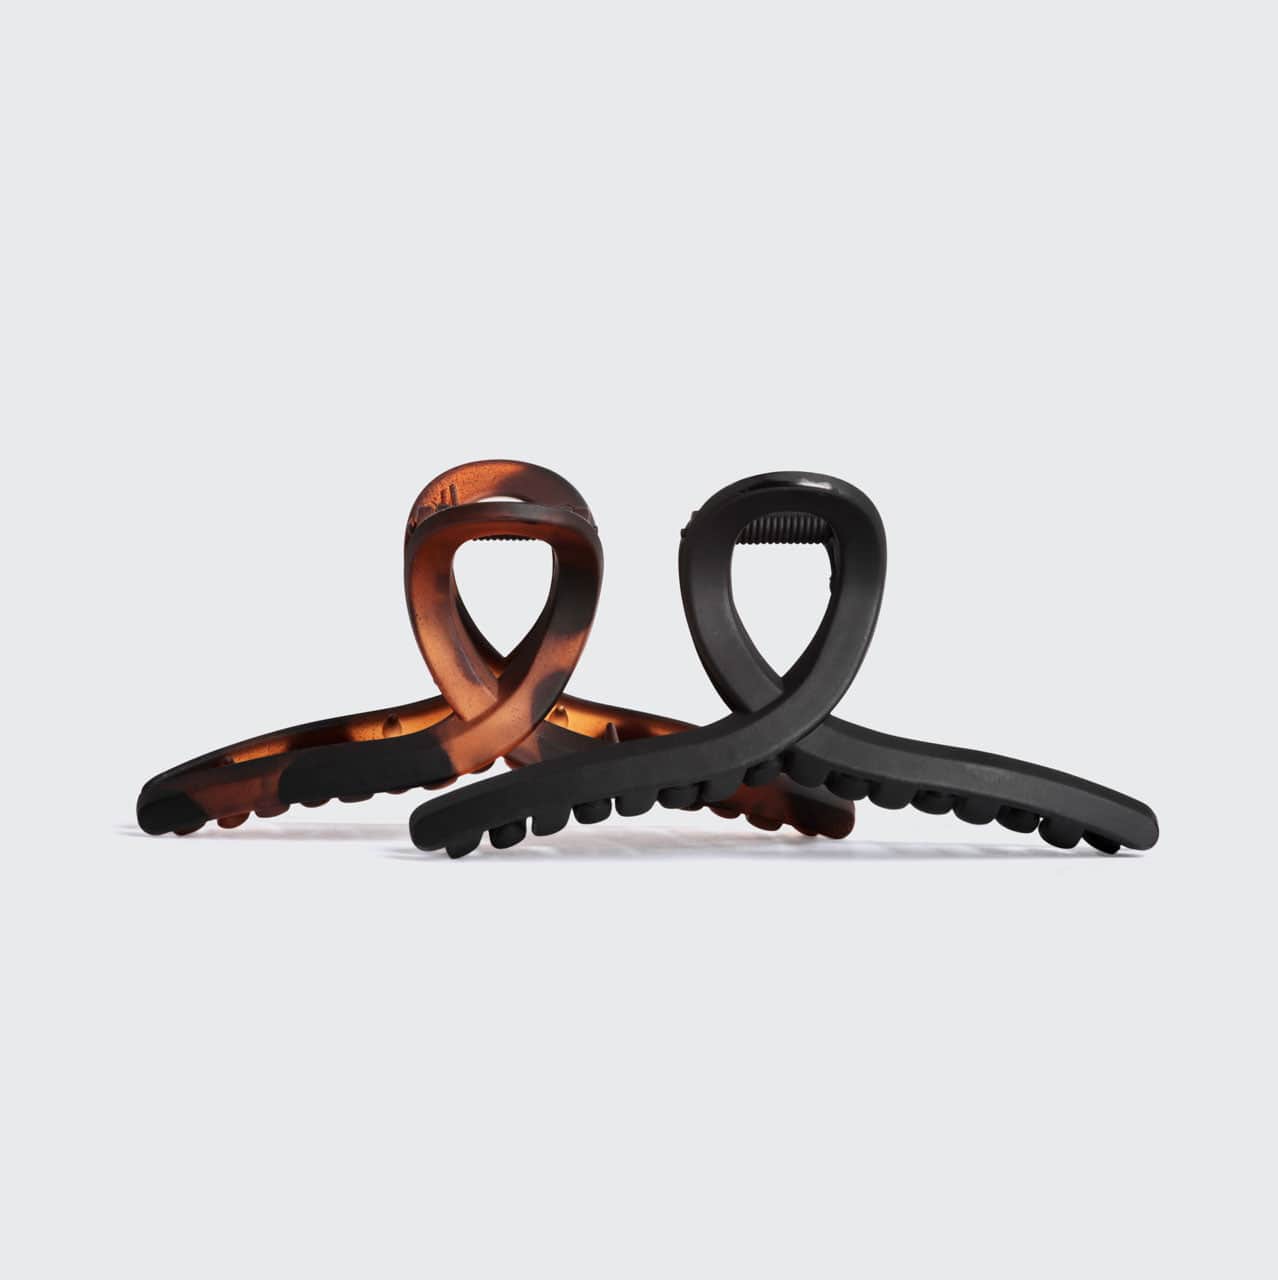 Large Loop Claw Clips 2pc - Recycled Plastic